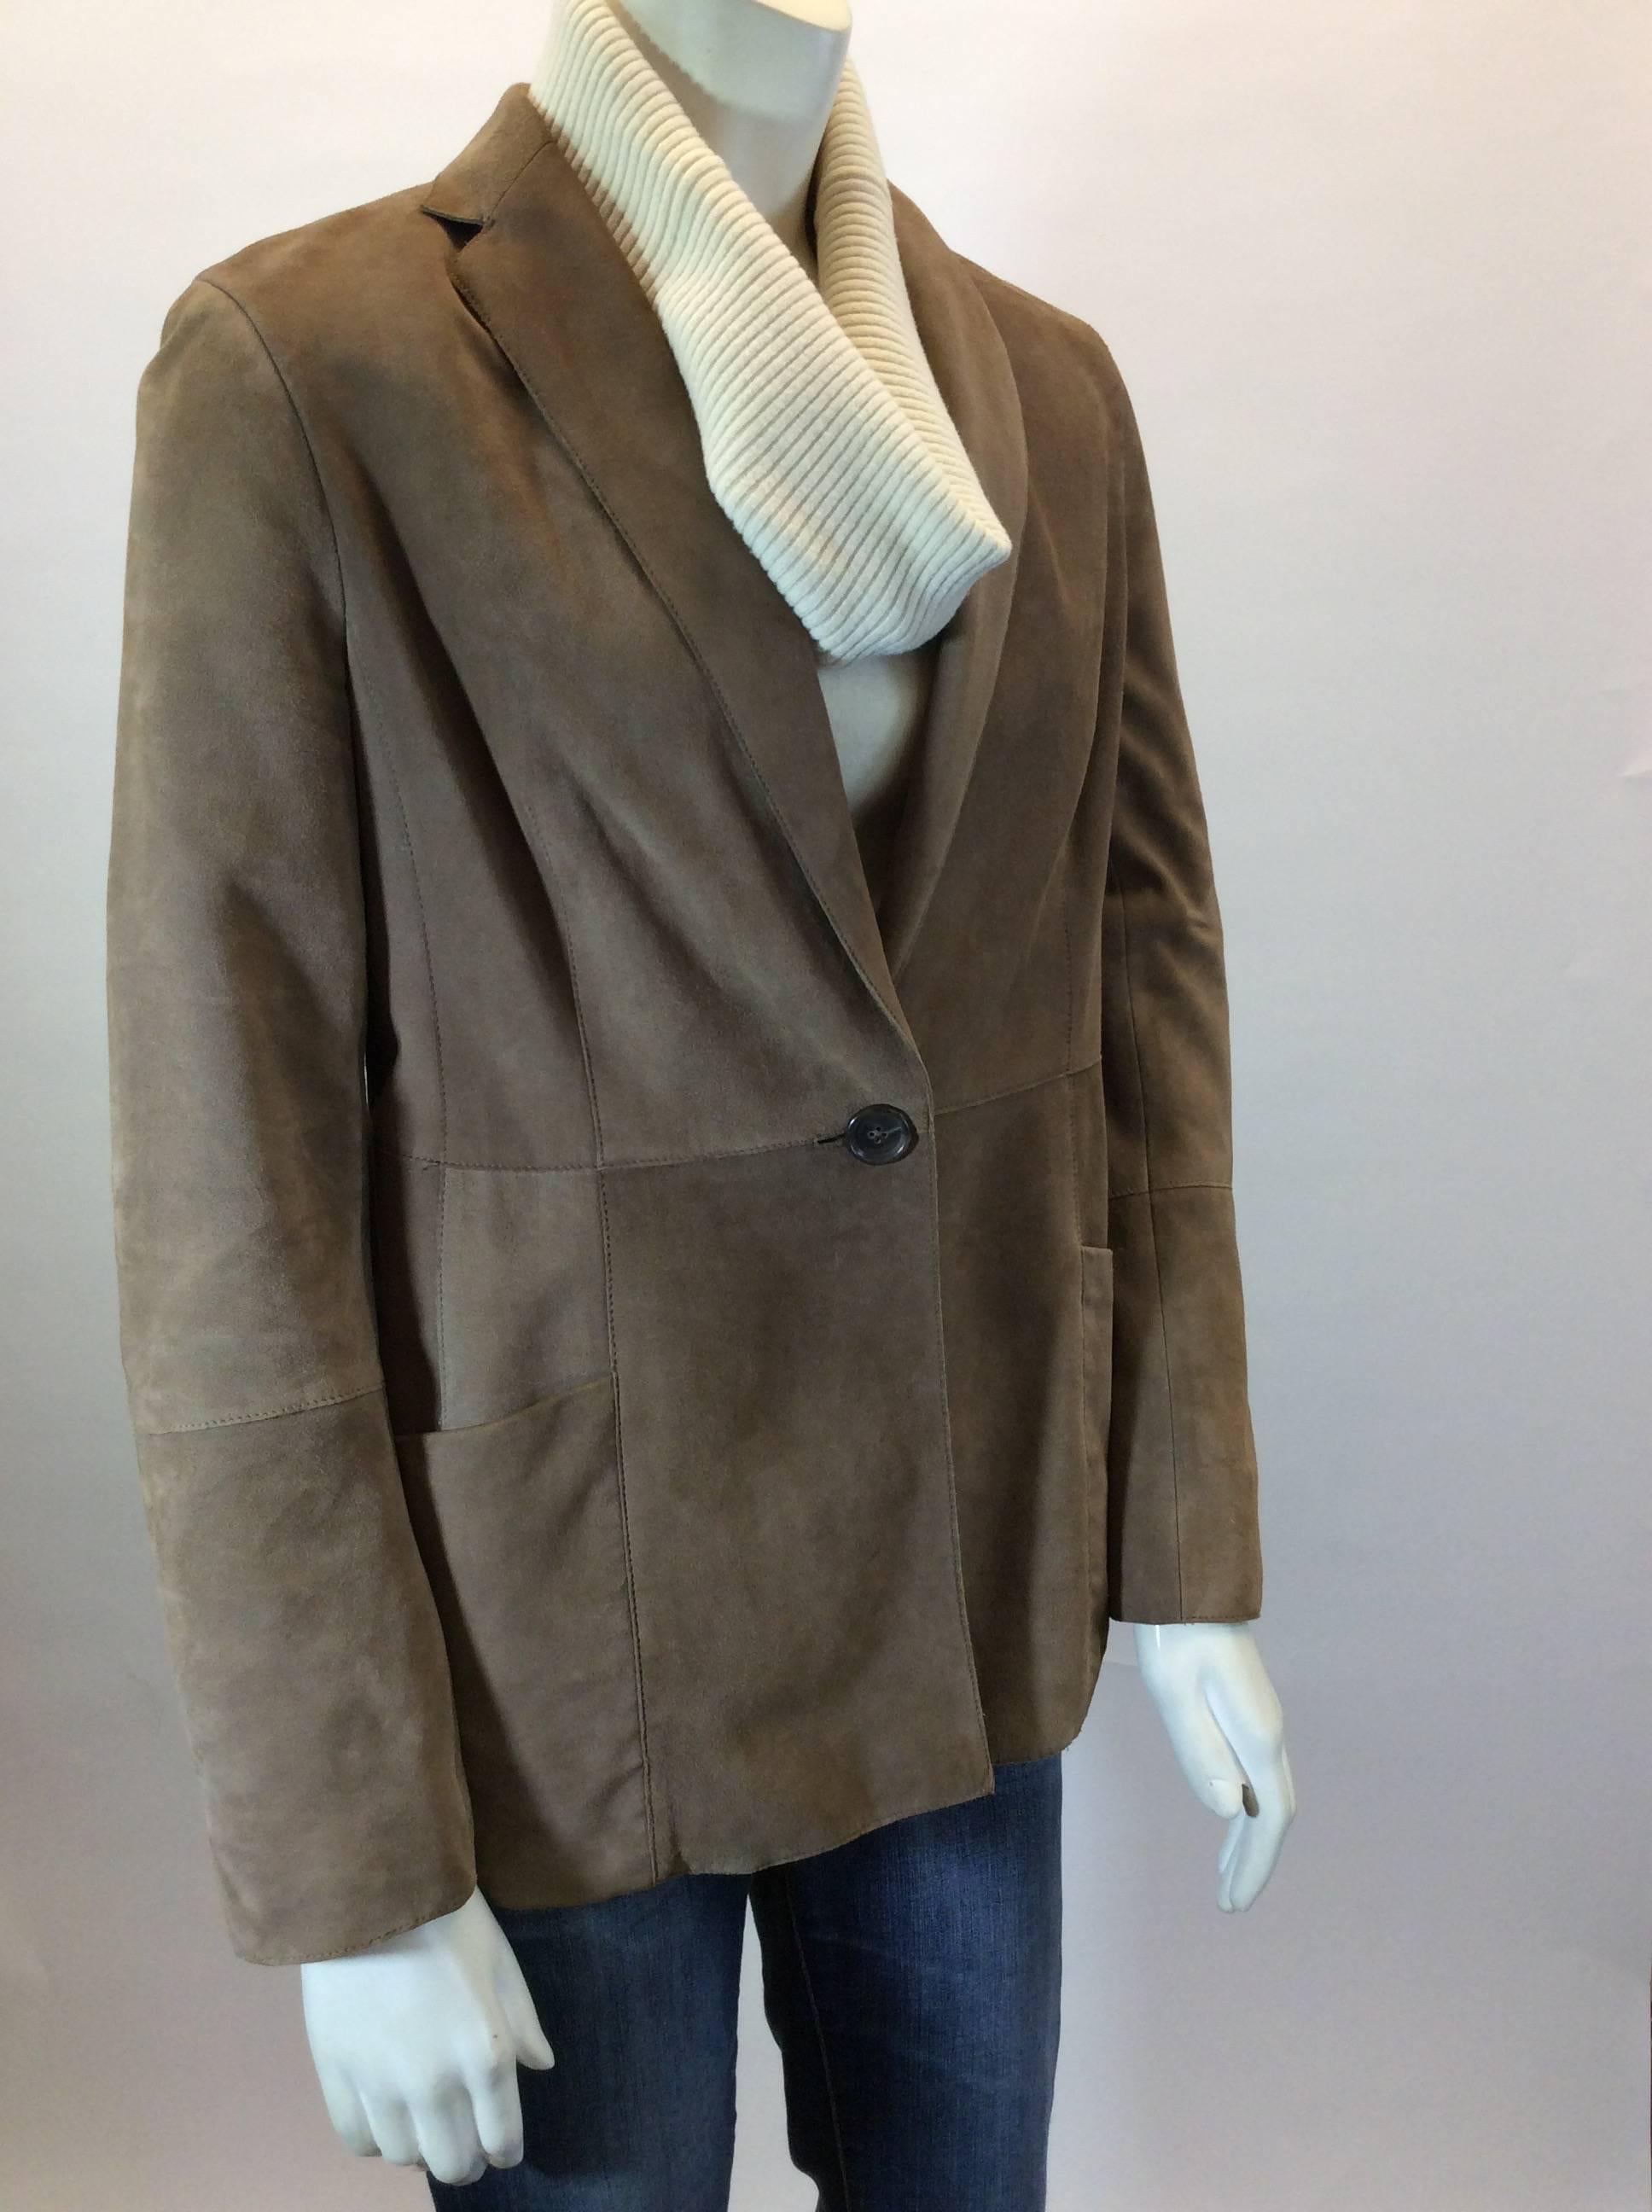 100% Goat Suede
Toffee Brown 
Single Button on Front for Closure
Single Pocket on Either side
US Size 8